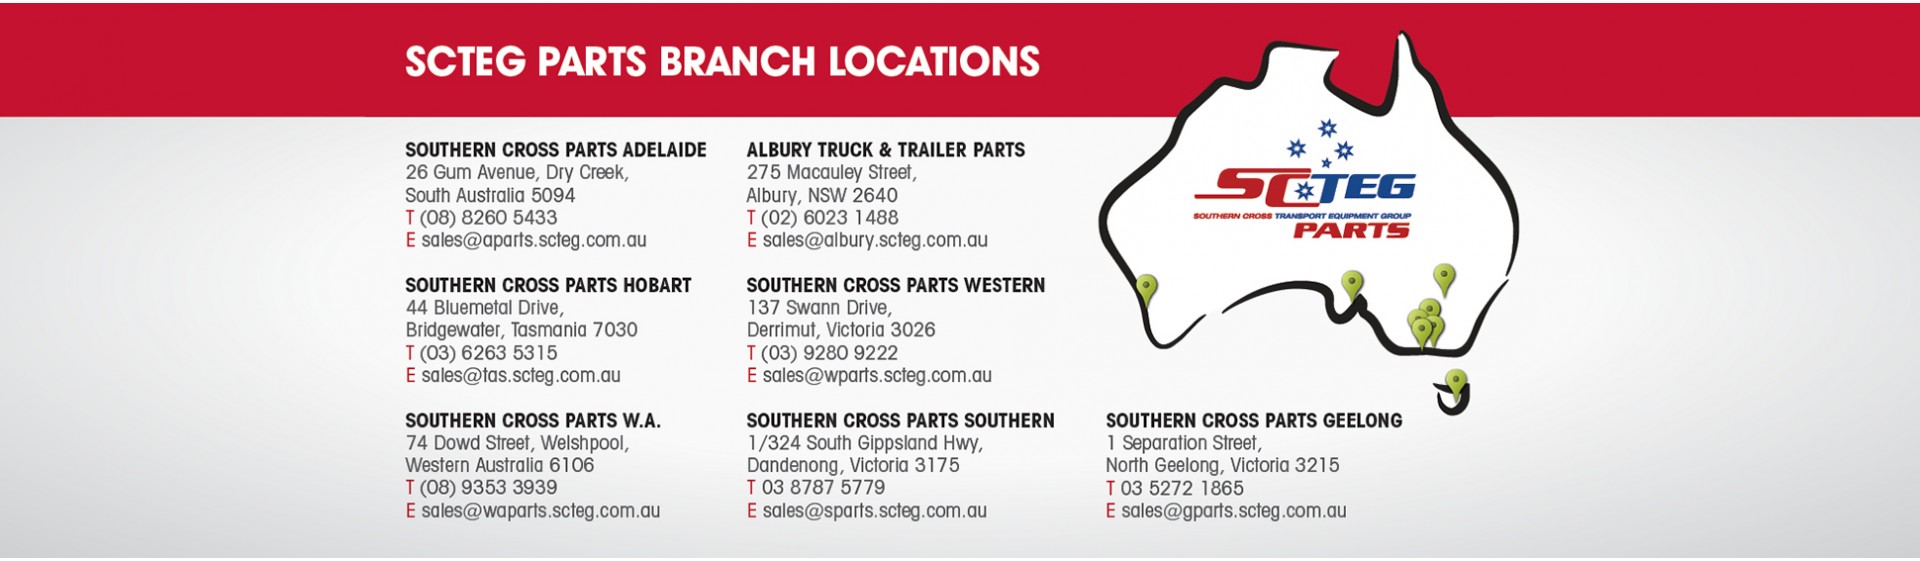 Truck Trailer Parts Branch Locations